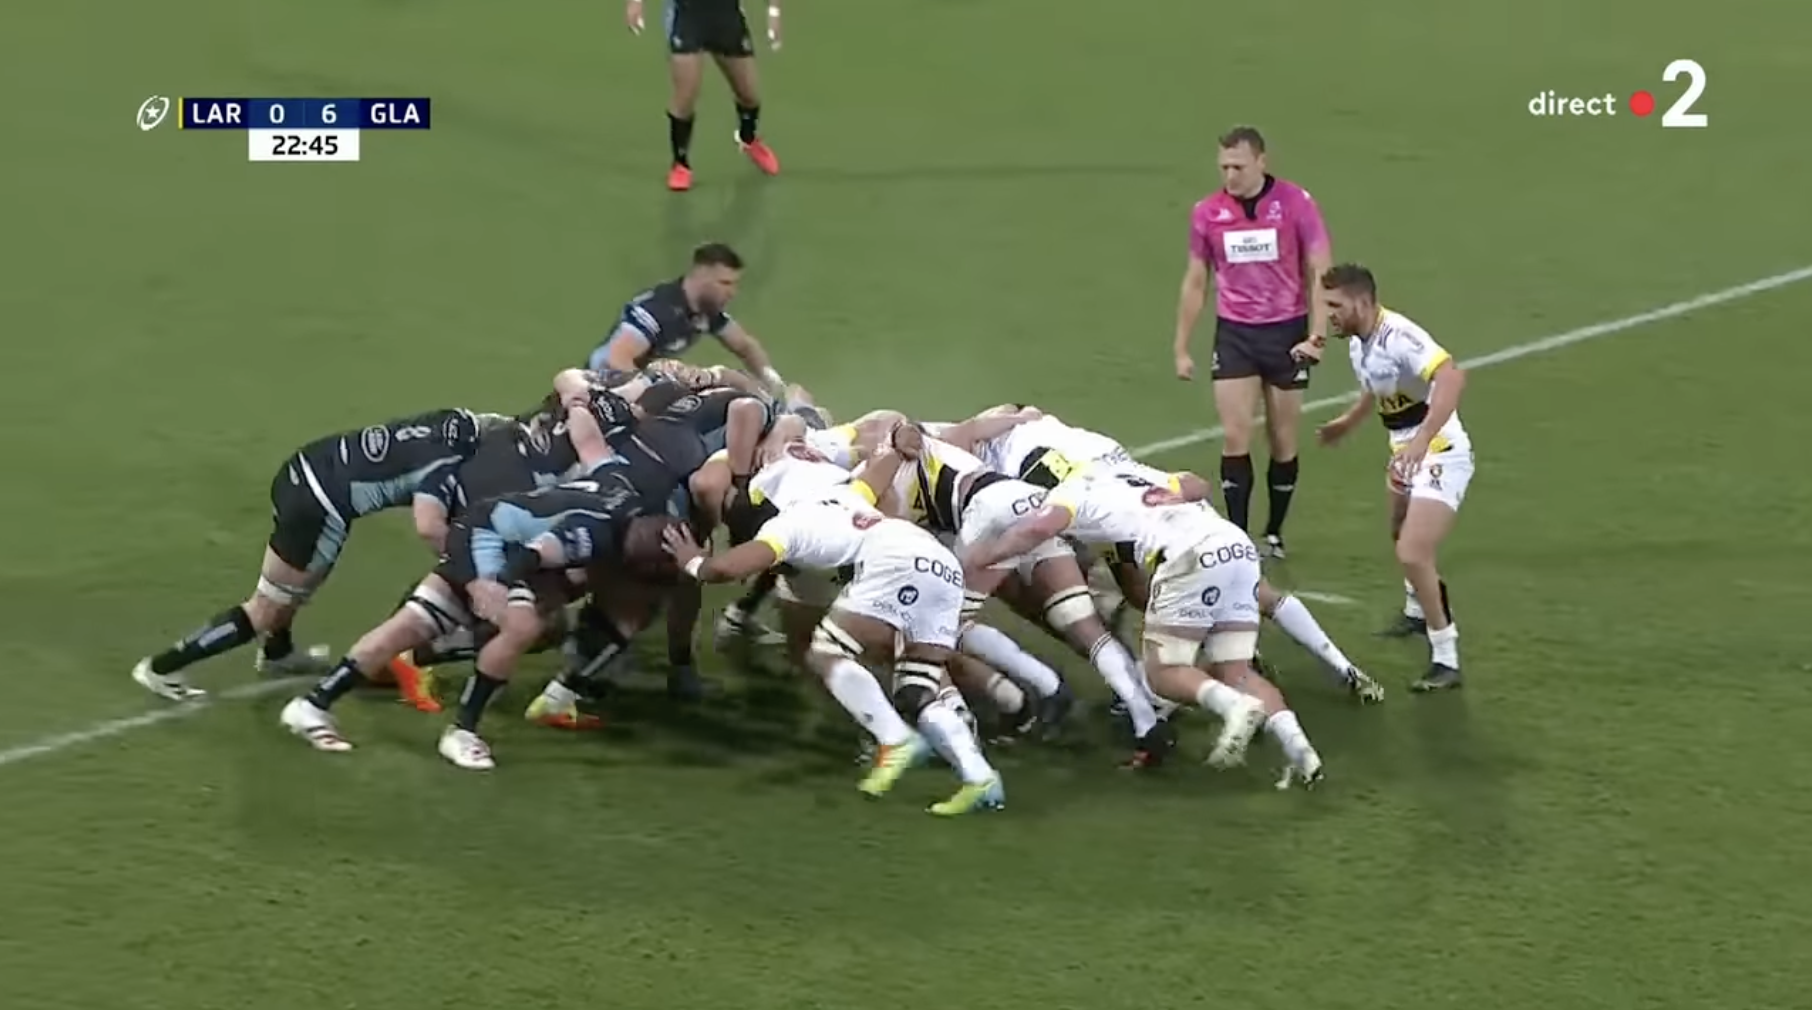 The 270kg combination that could tear every scrum in Europe apart